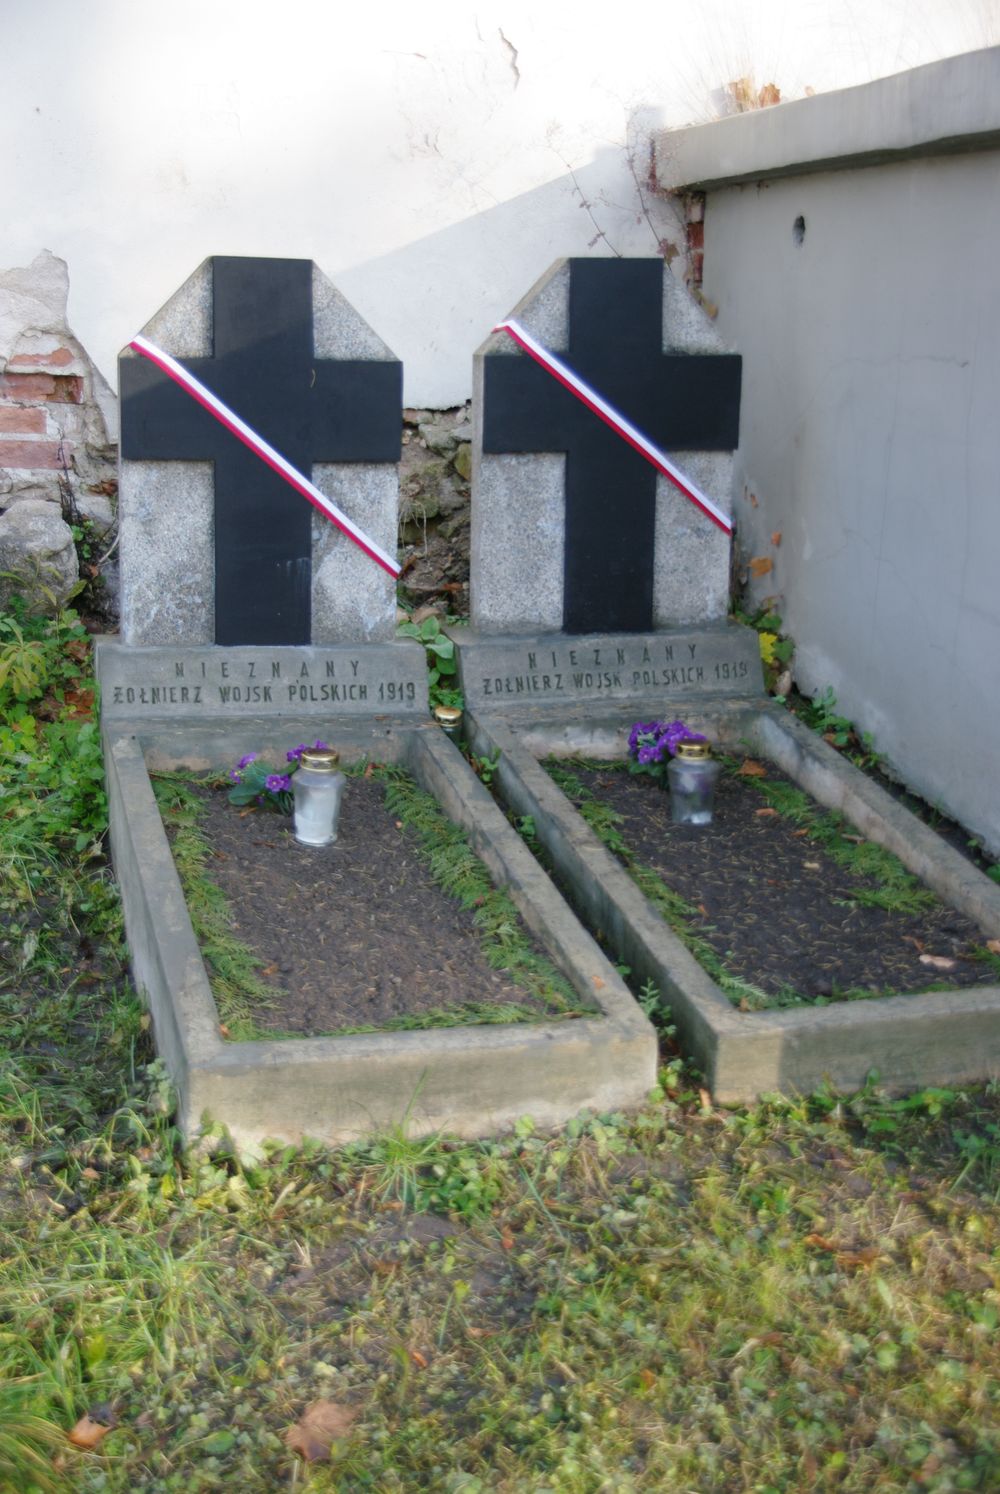 Graves of Polish soldiers killed between 1919 and 1920